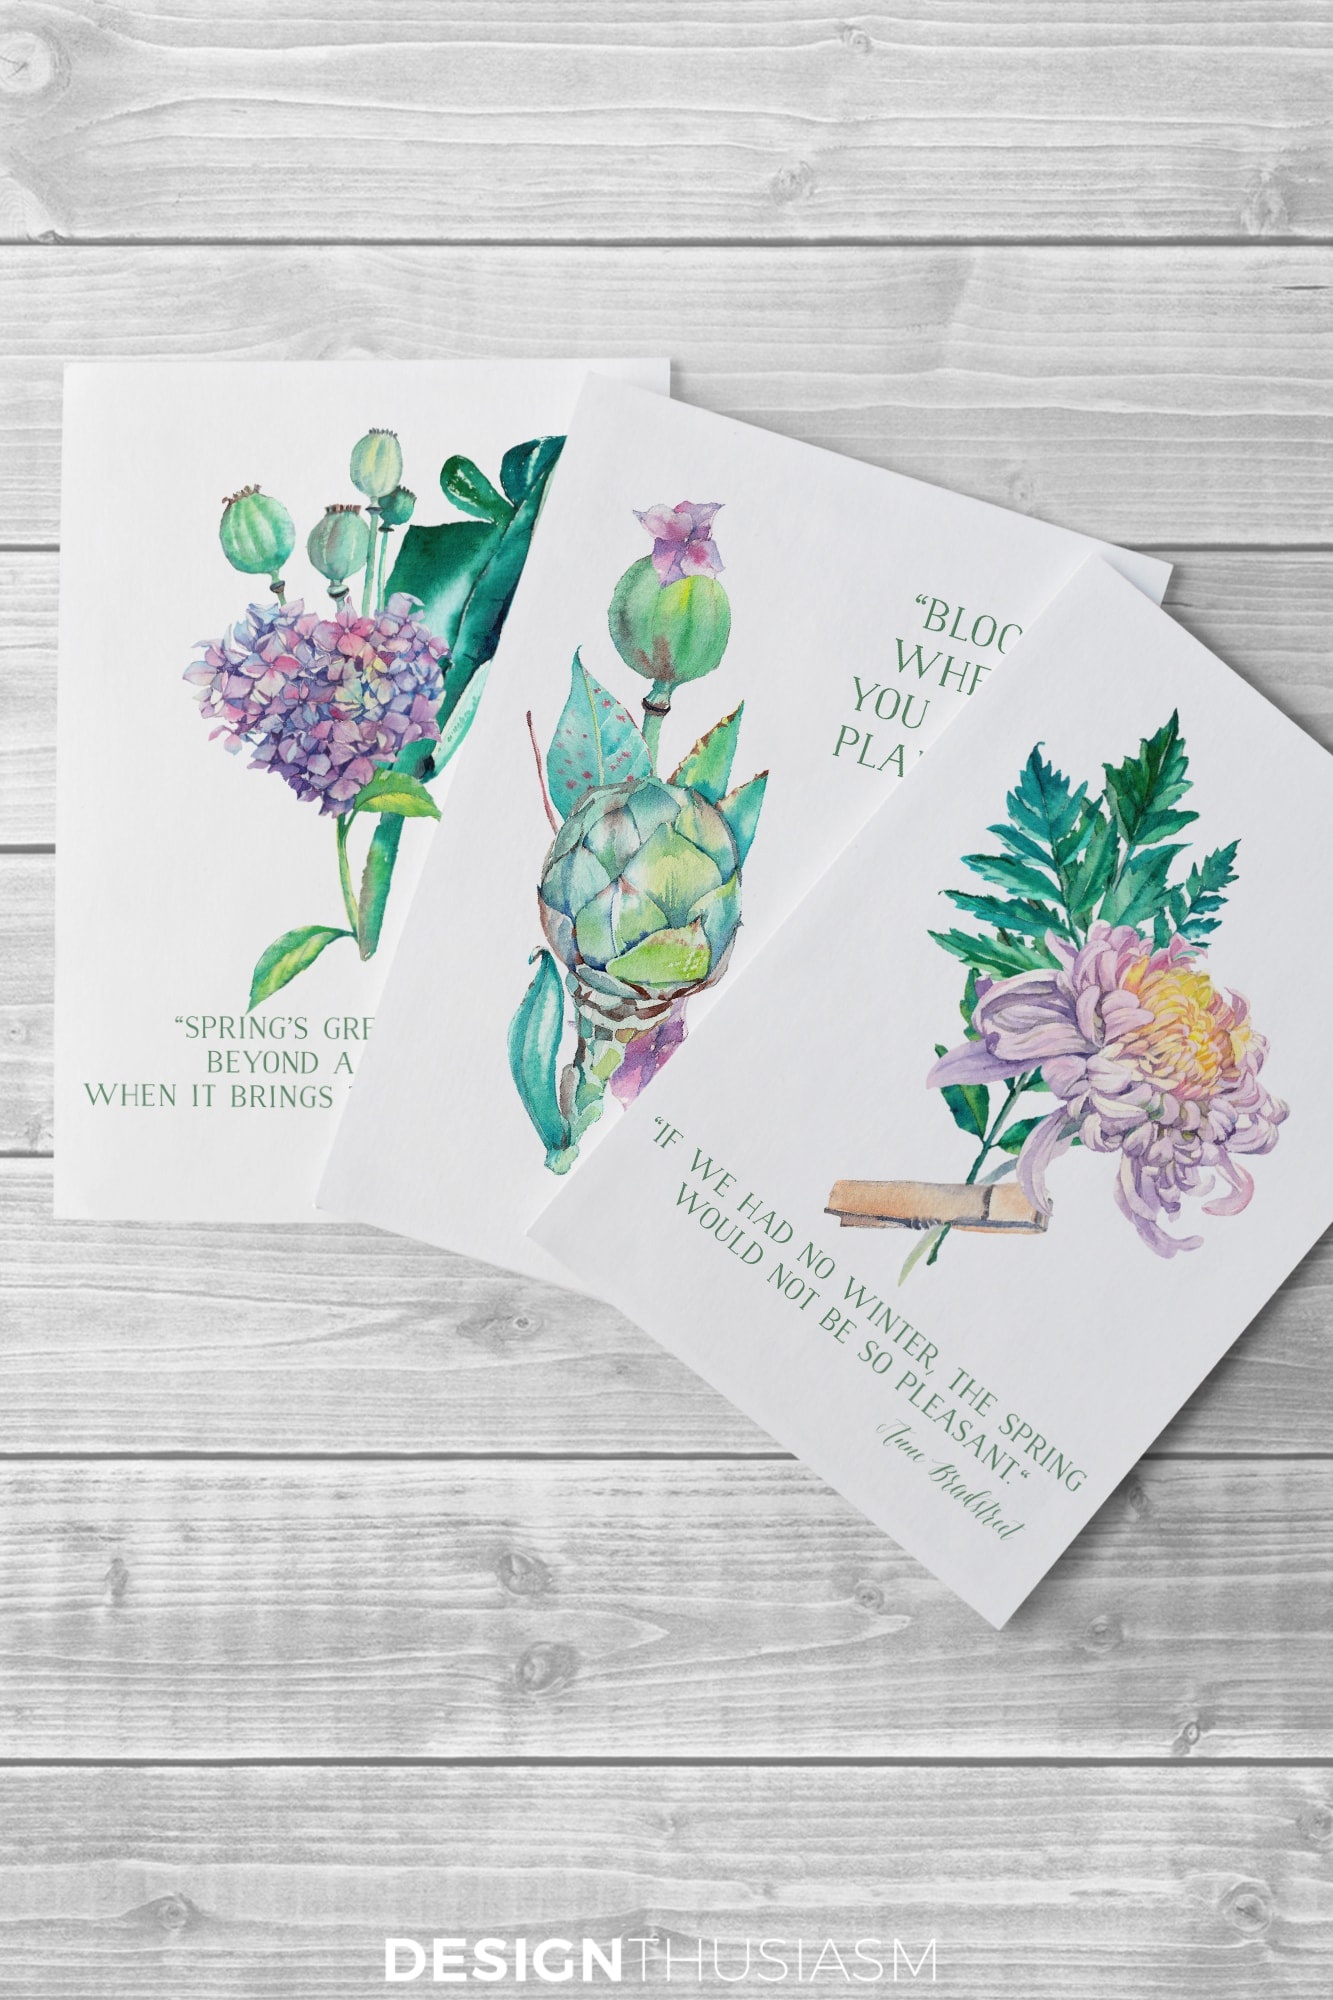 Free Printable Art For Spring: Watercolor Flowers For Diy Wall Decor - Free Printable Decor